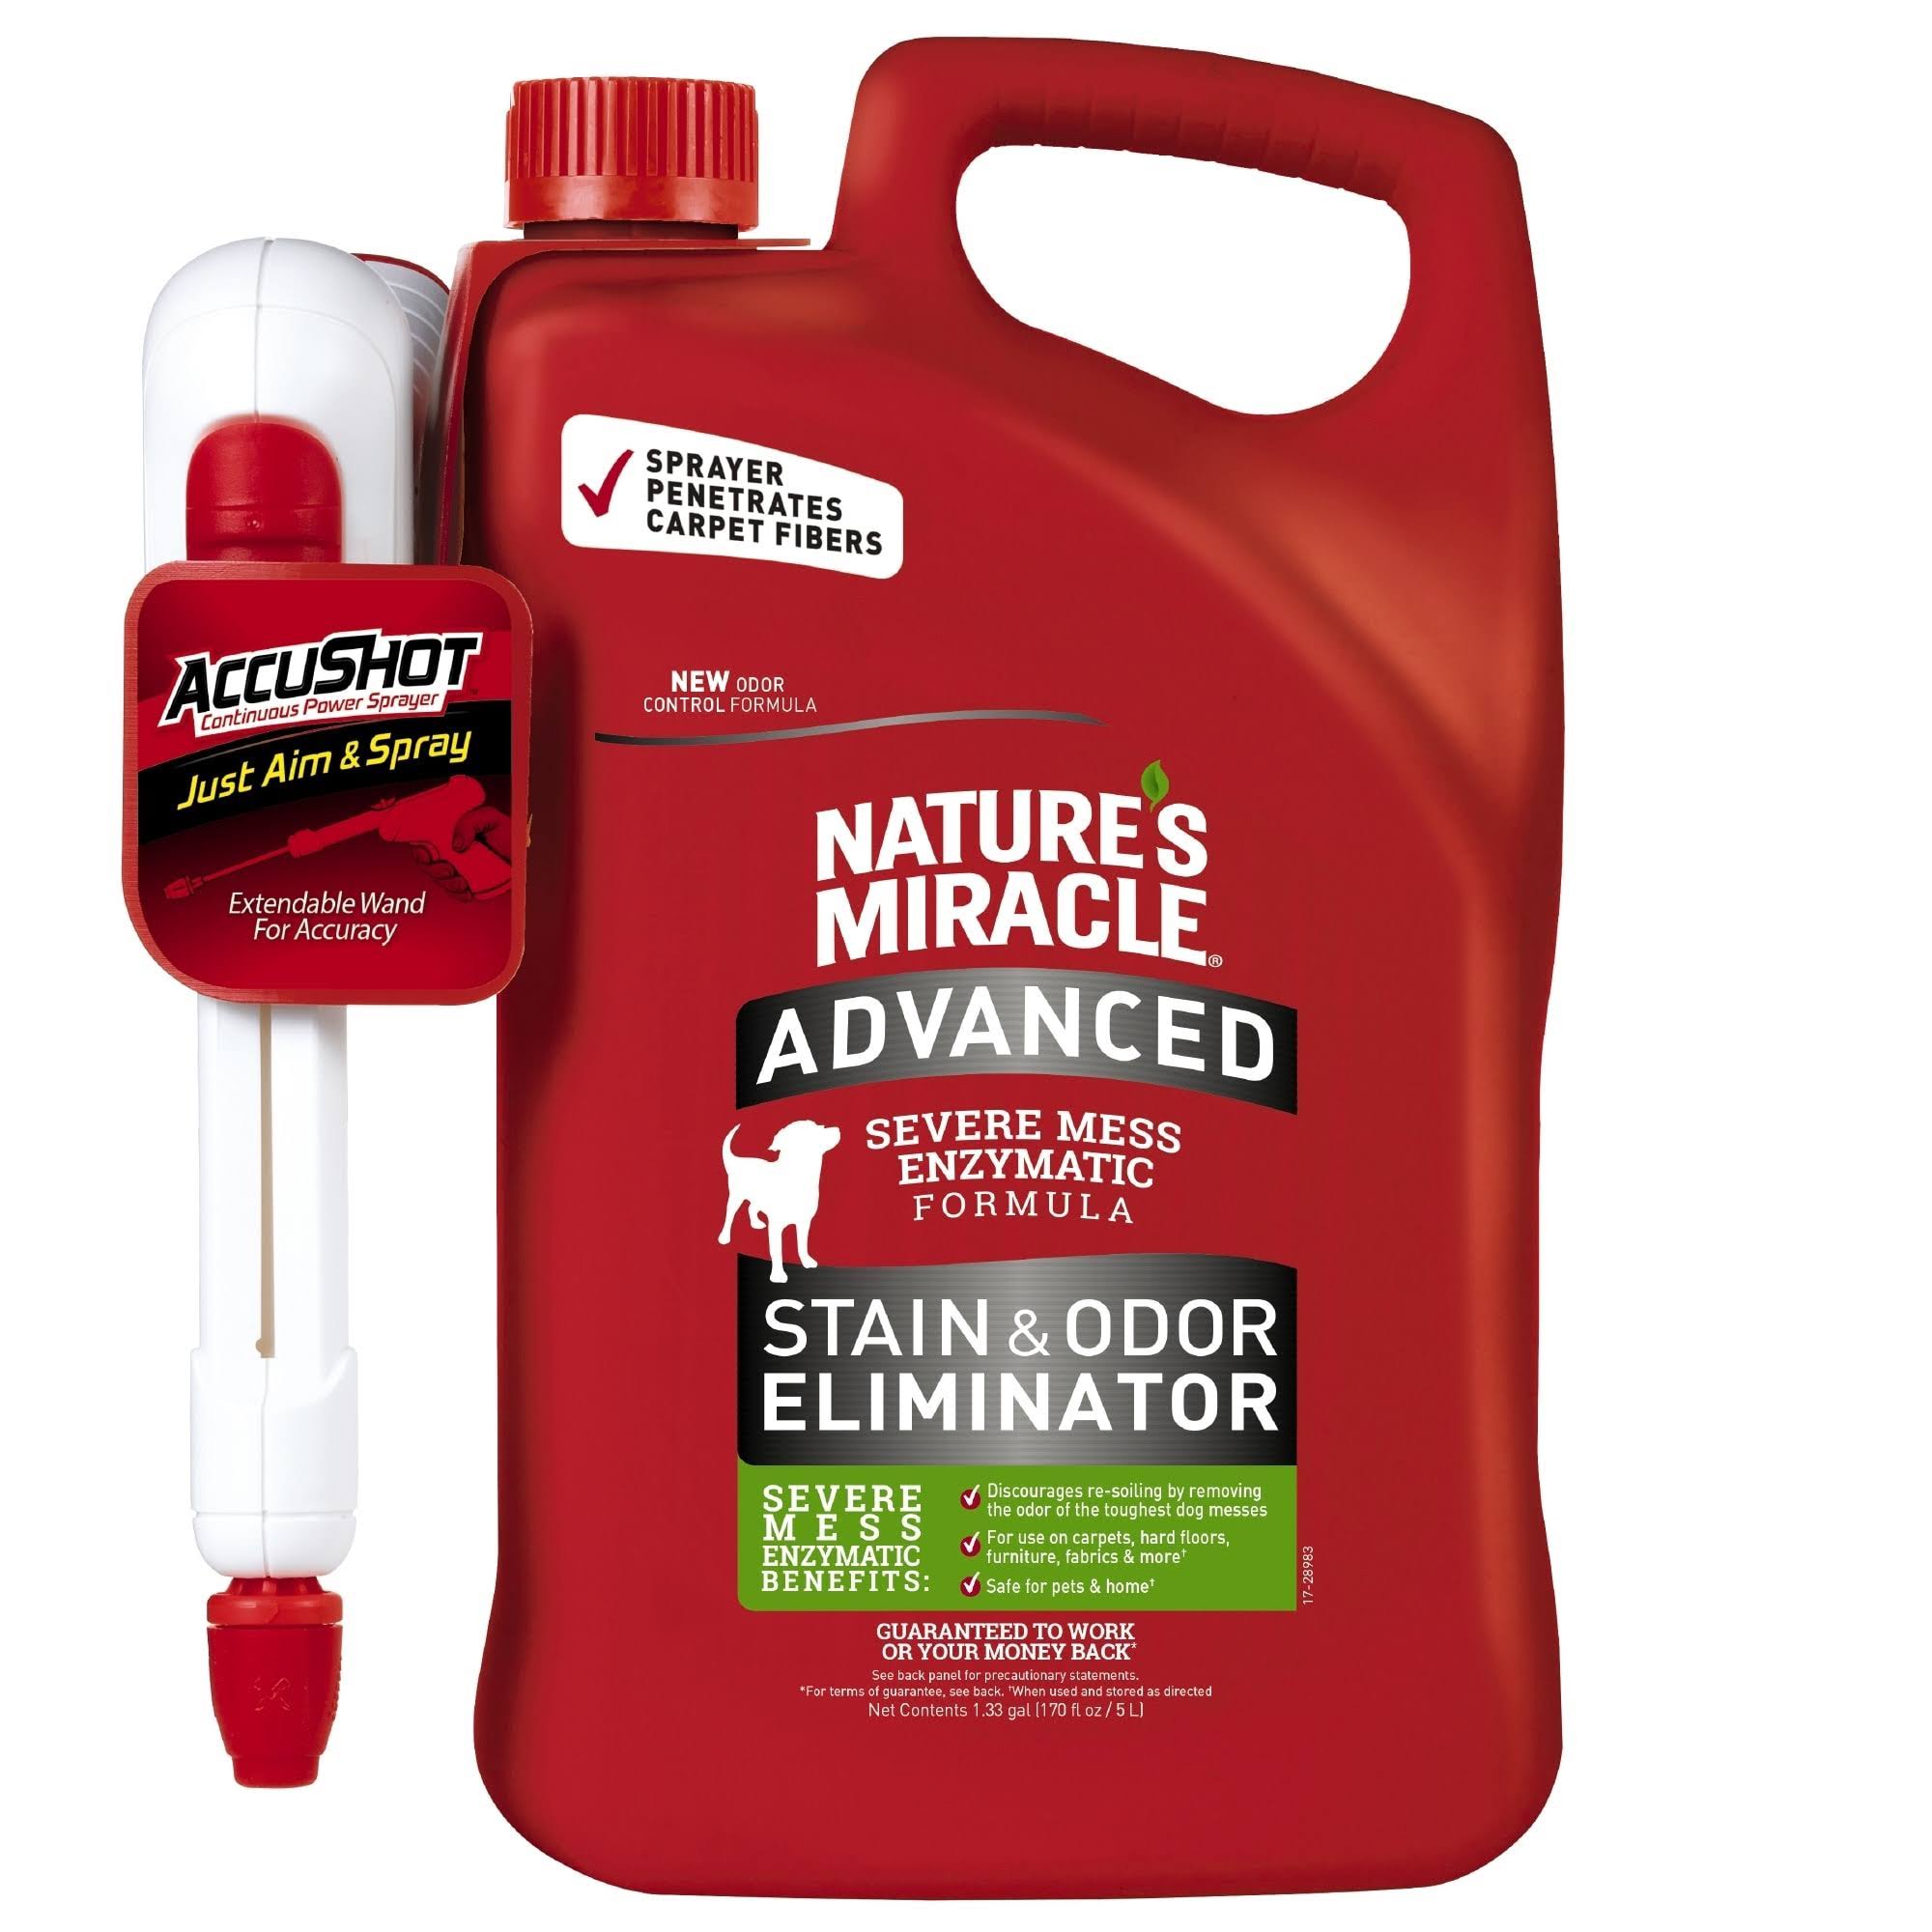 Natures Miracle Advanced Stain and Odor Eliminator - 170oz